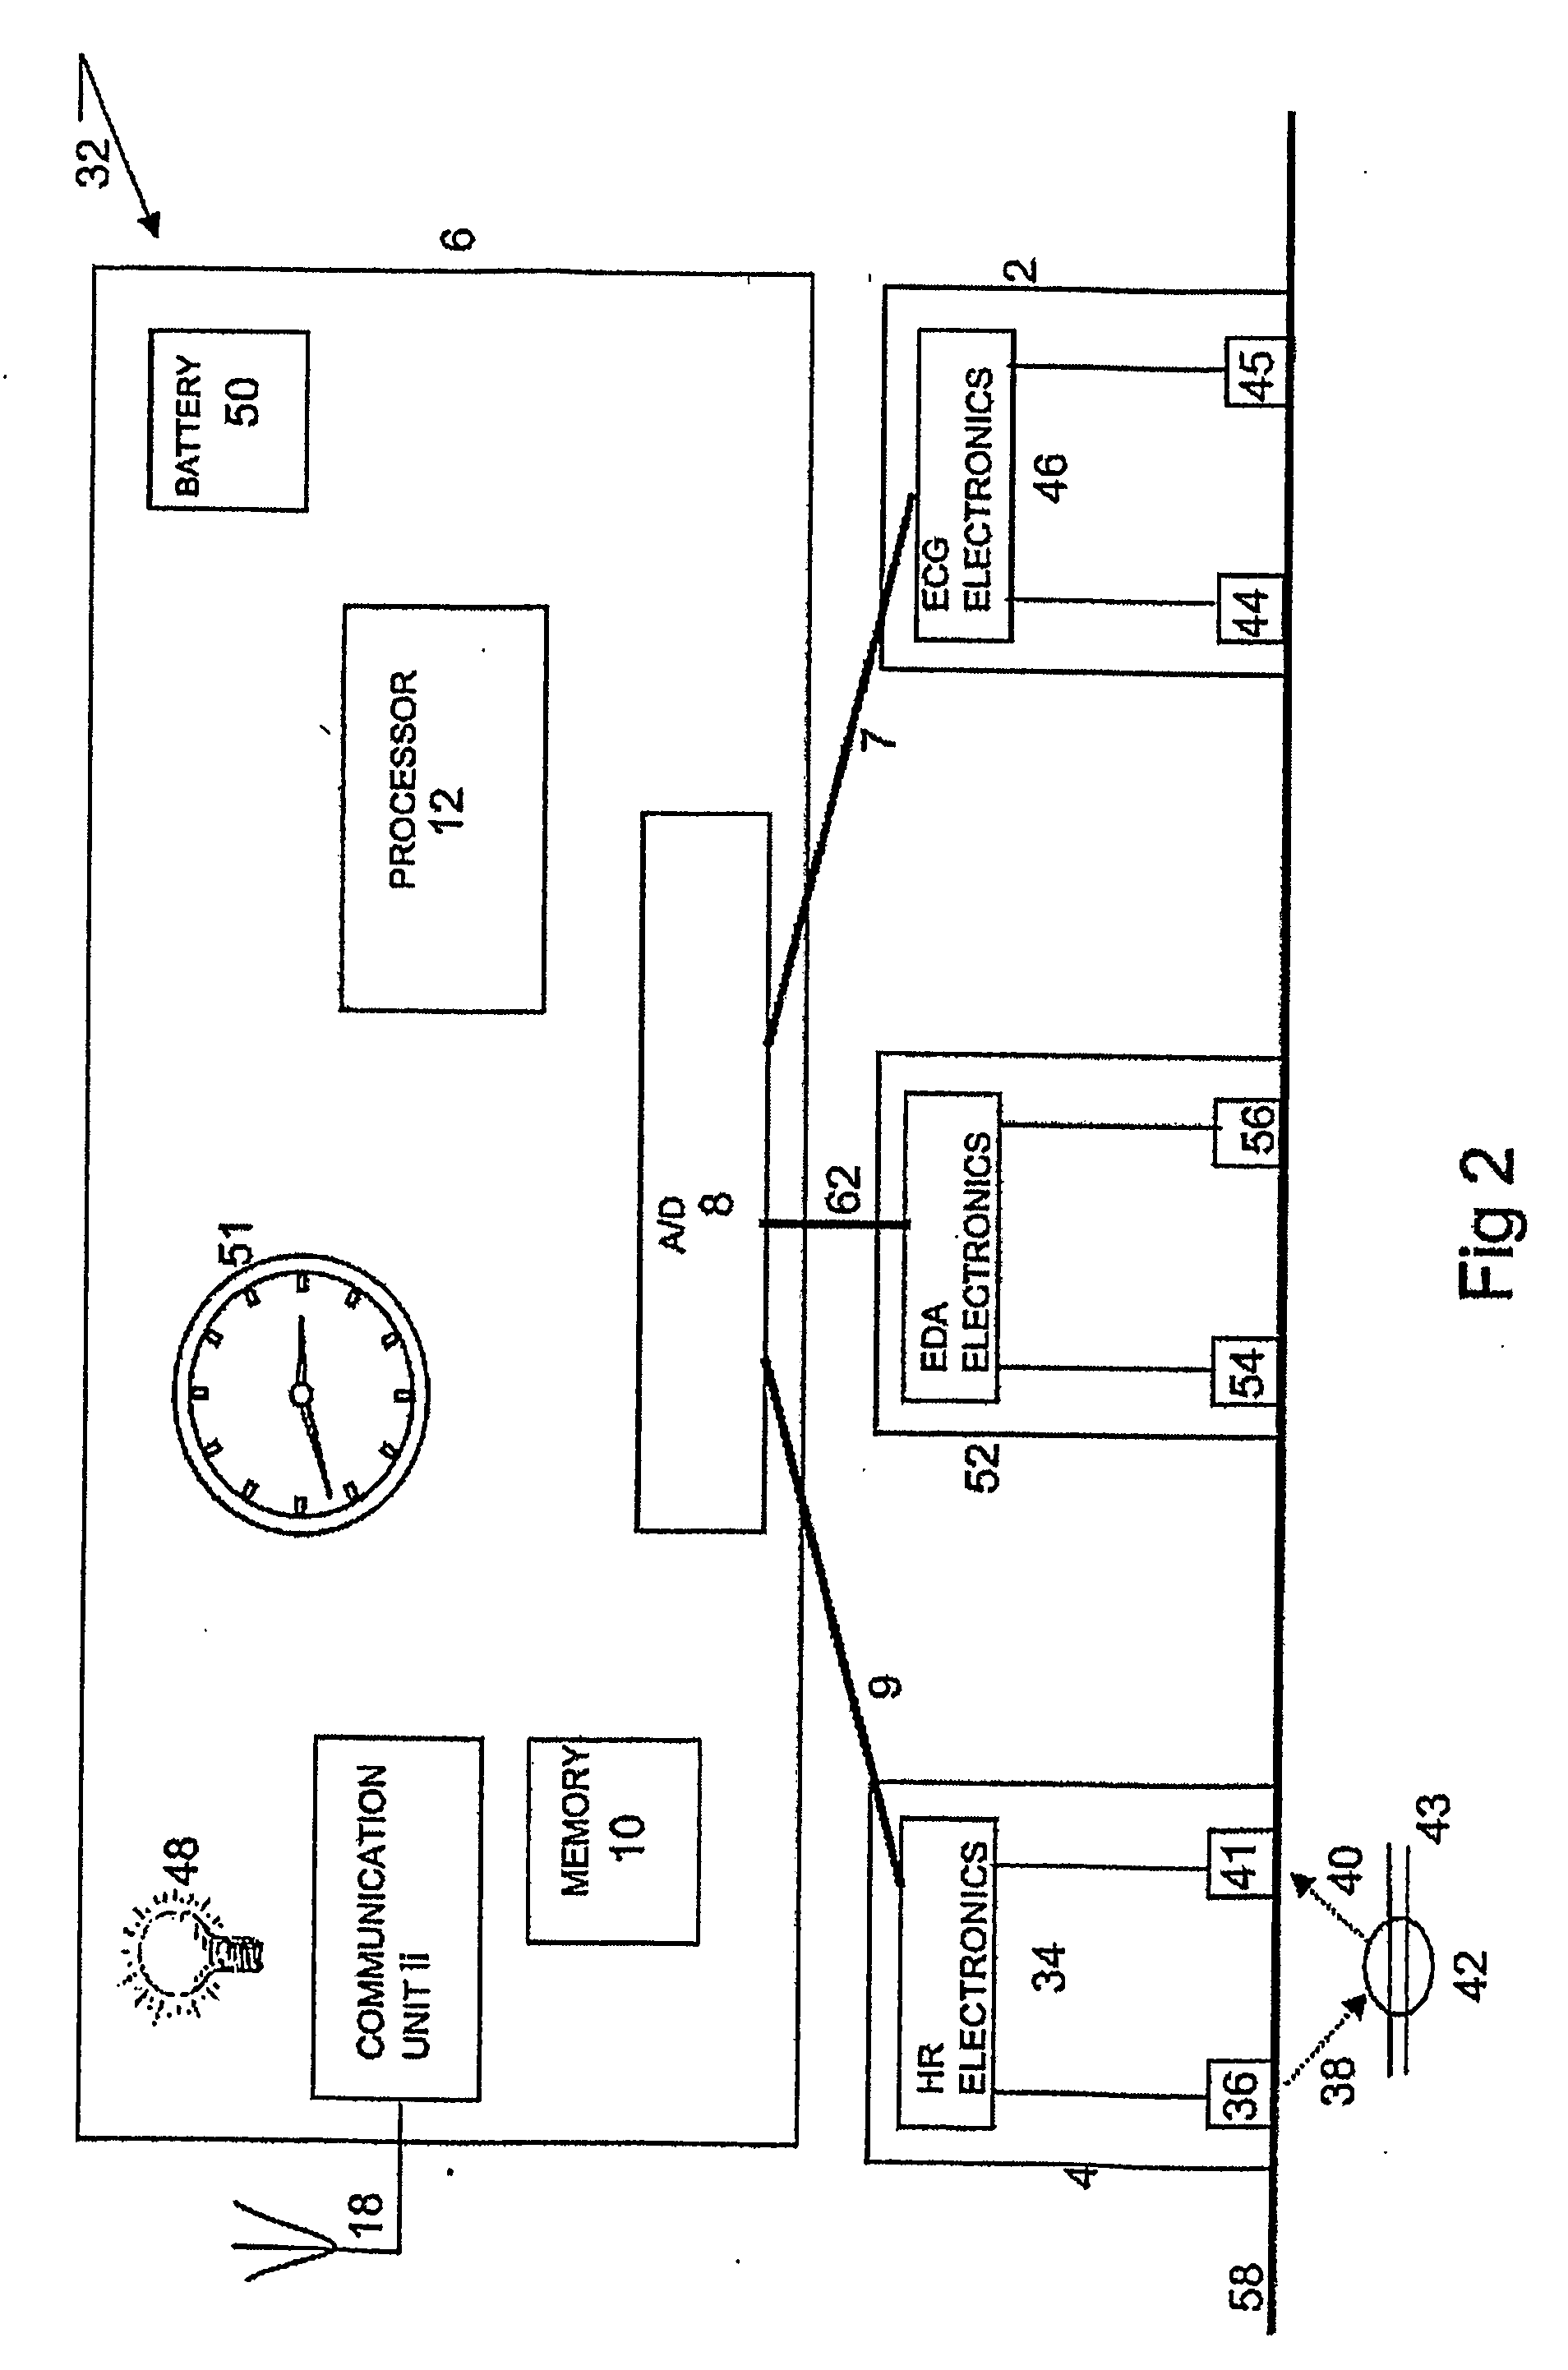 System for Continuous Blood Pressure Monitoring